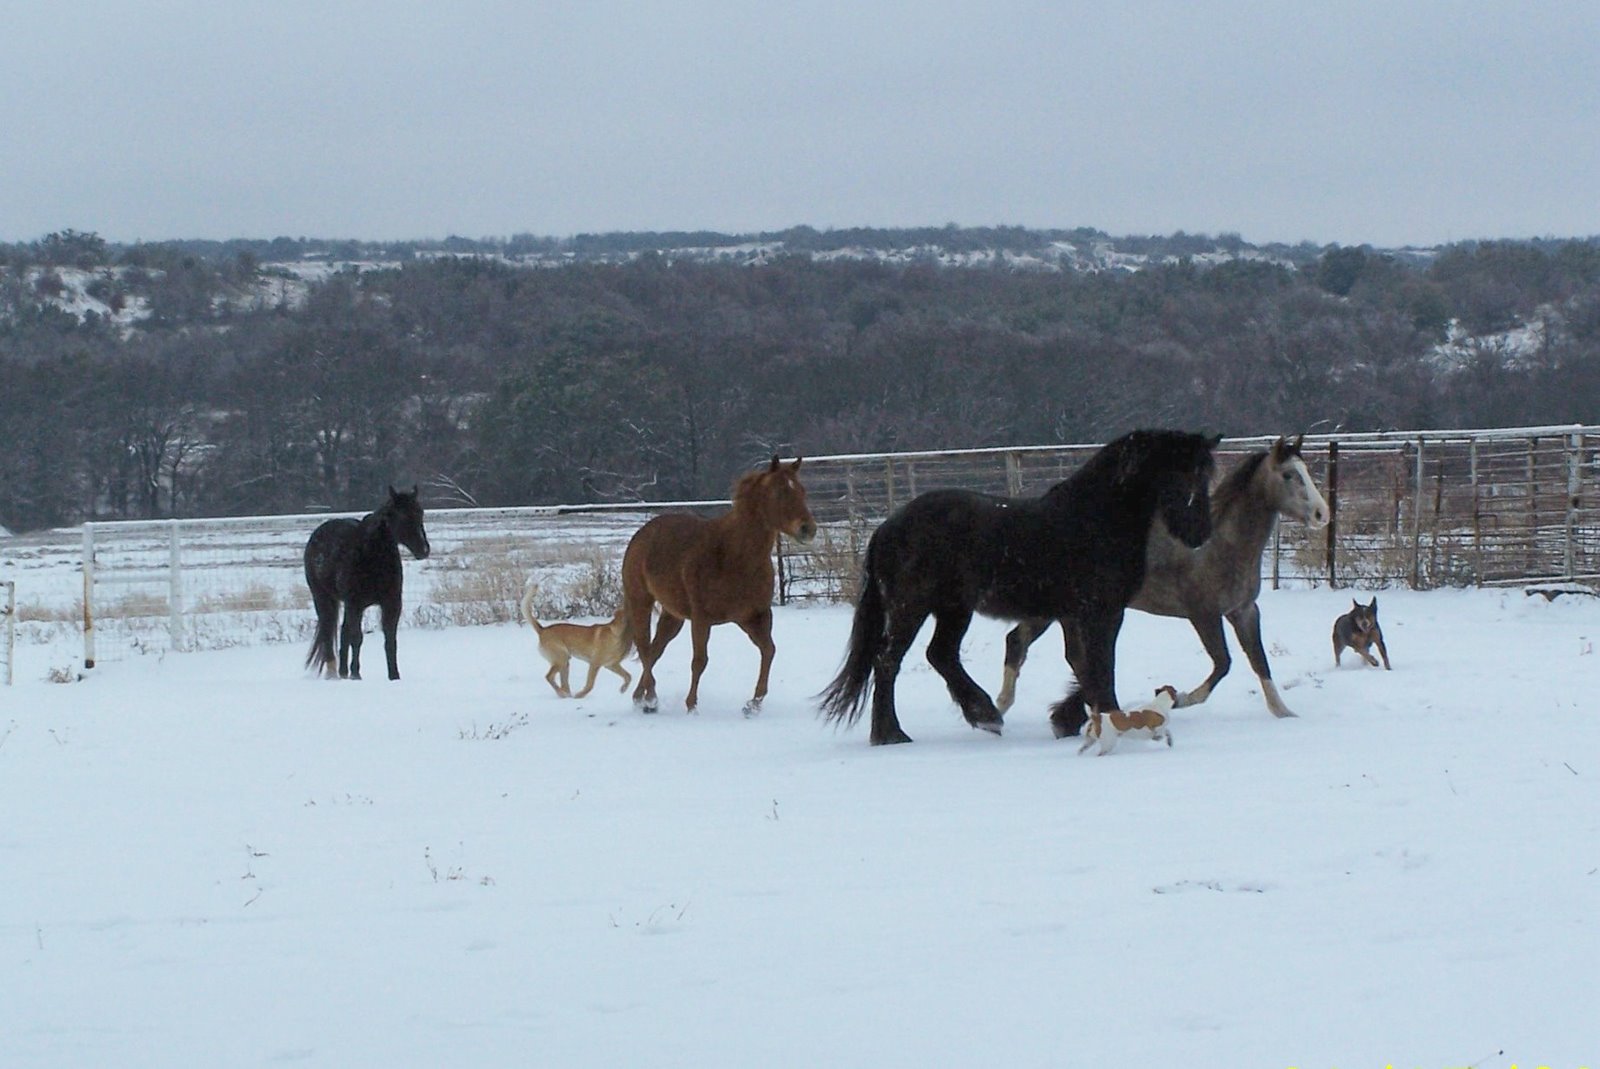 [Dogs+and+horses+playing+in+snow.jpg]